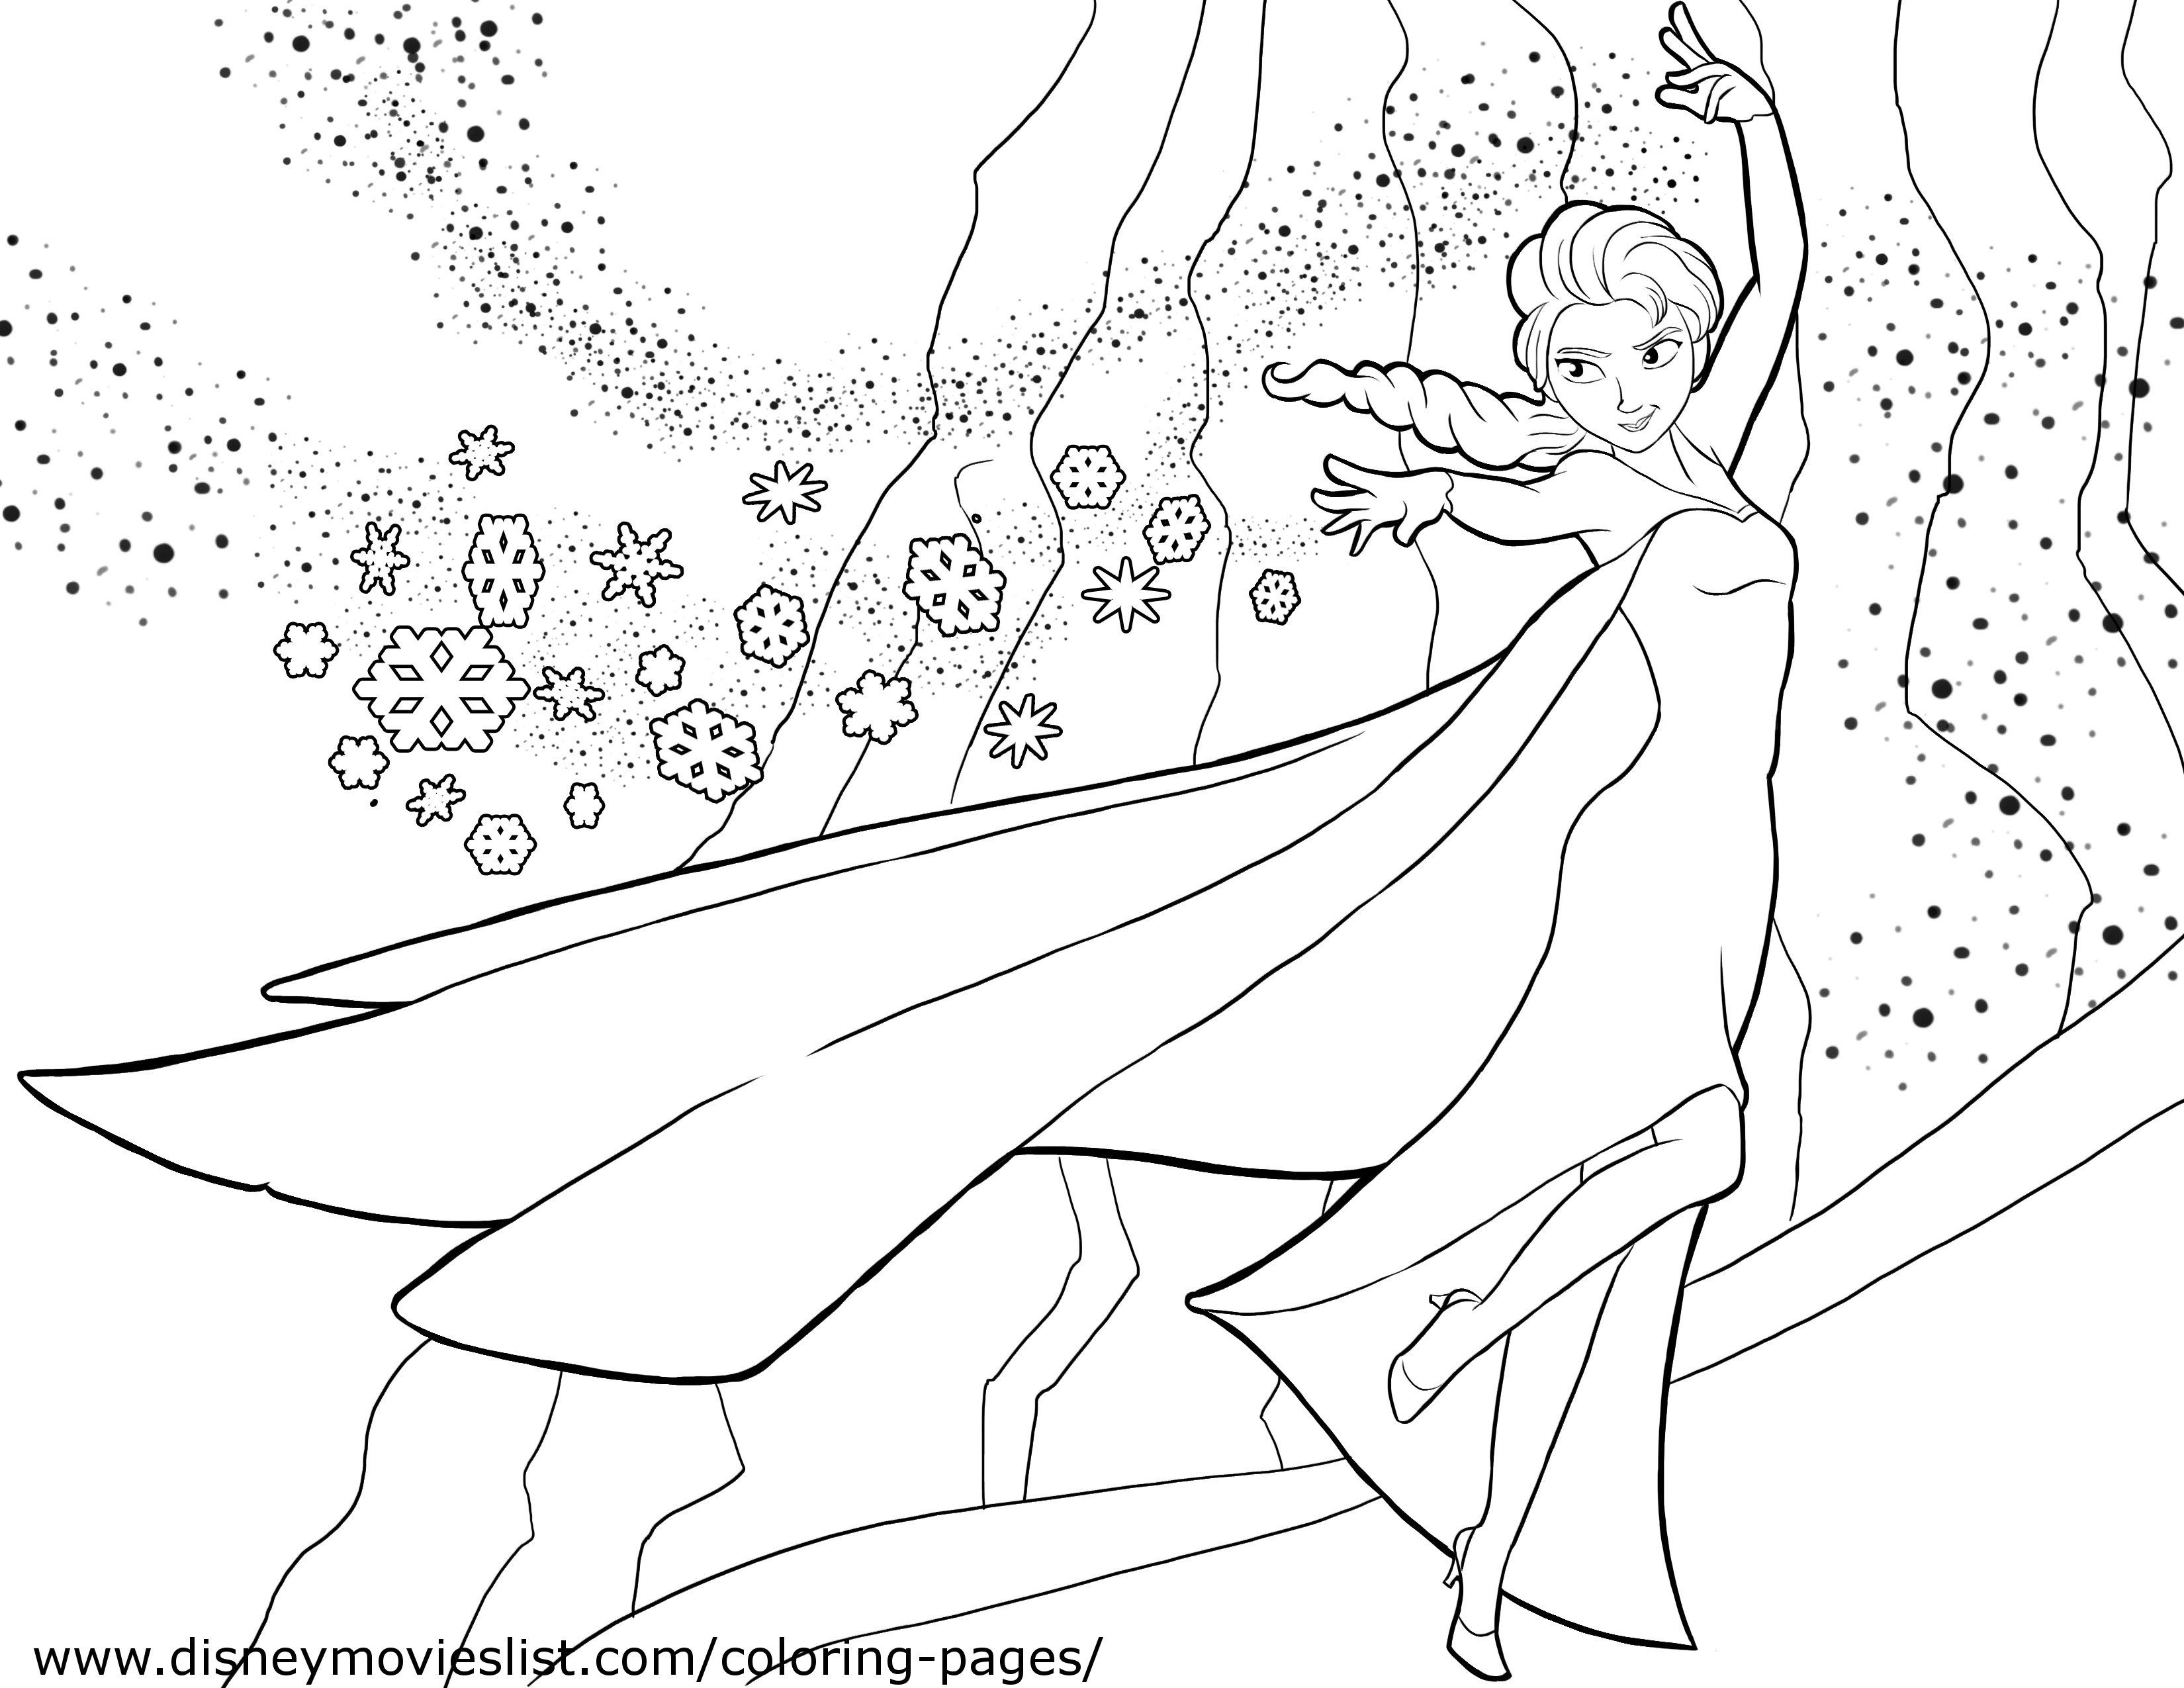 Frozen Coloring Pages | Only Coloring Pages